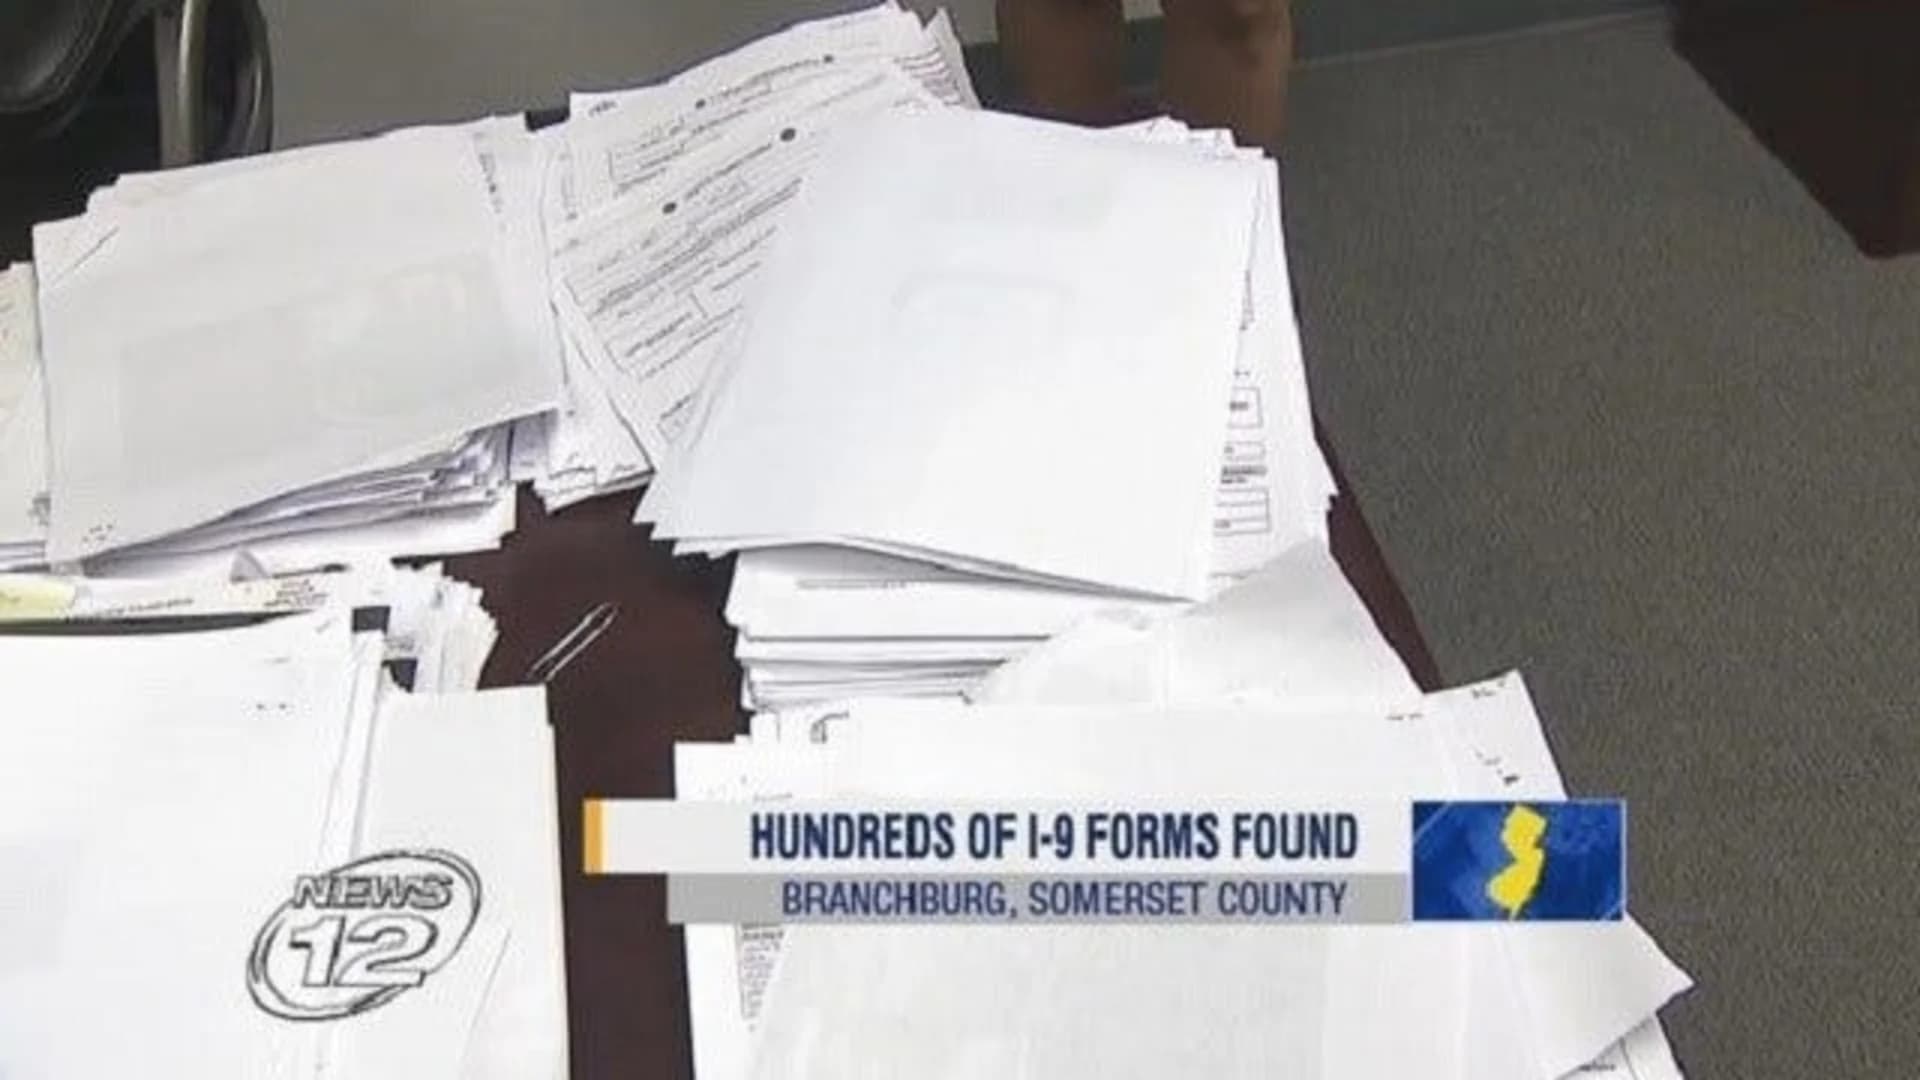 Federal officials retrieve I-9 forms found in used office furniture